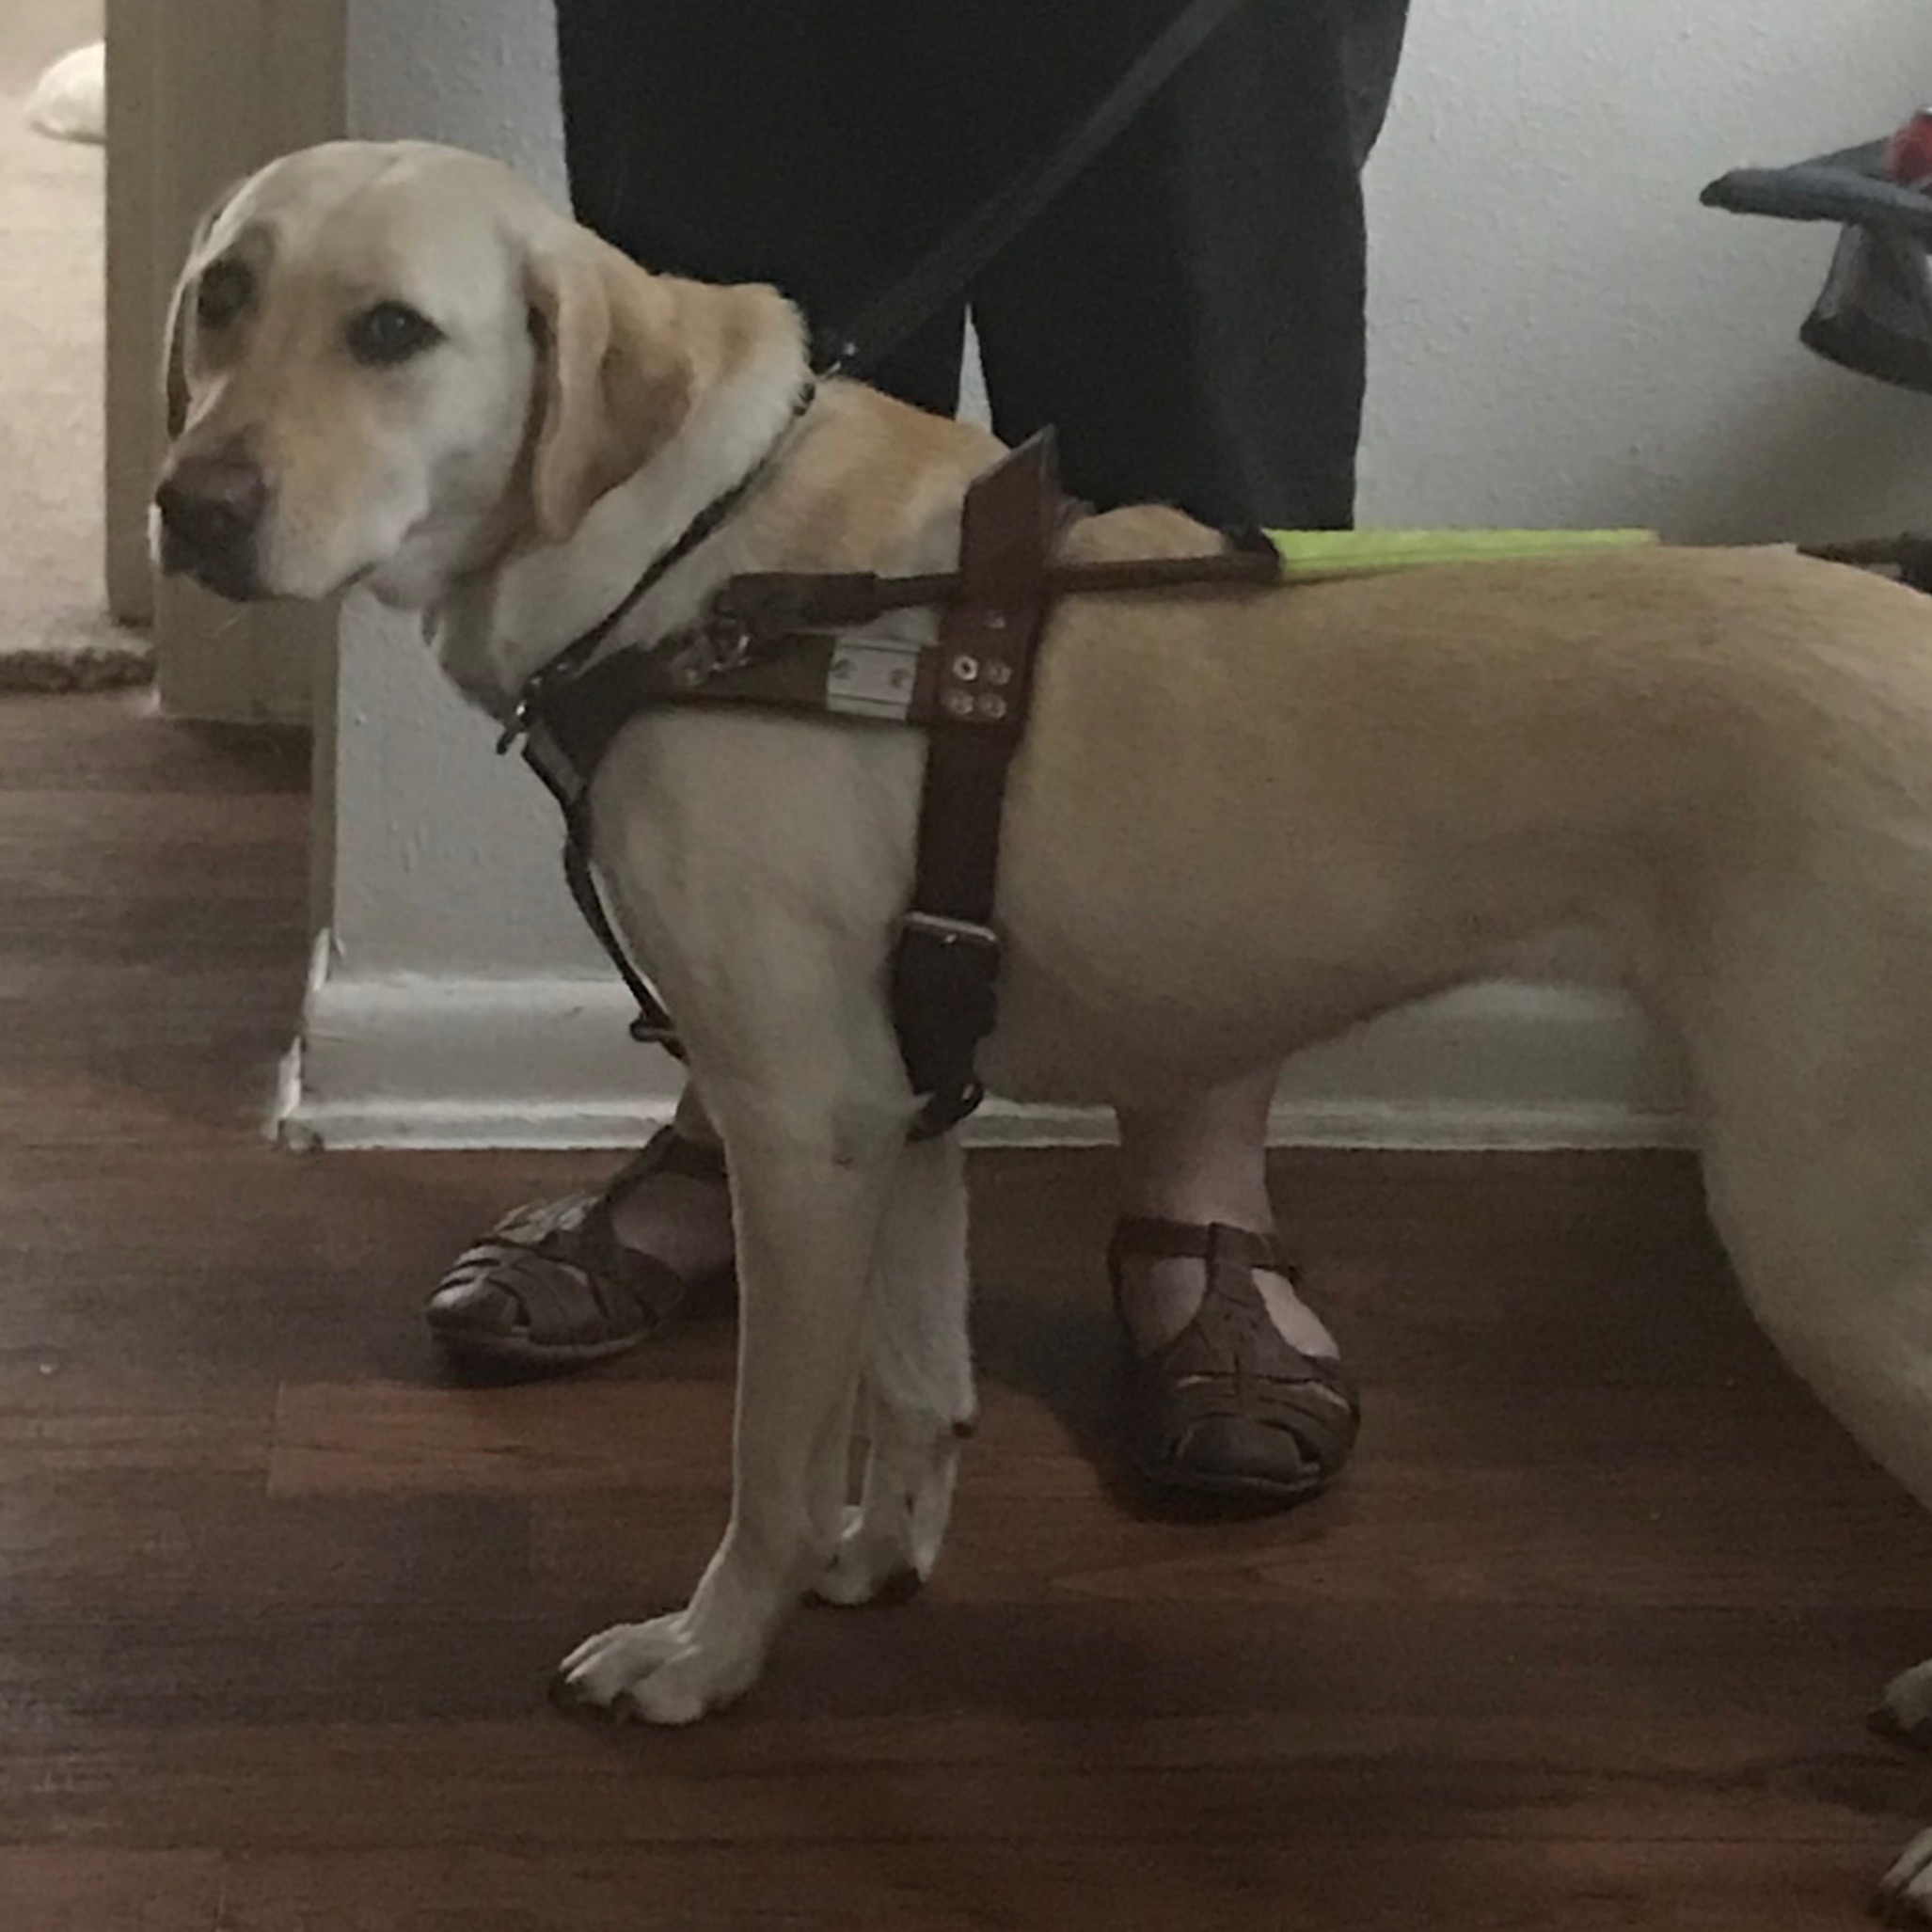 A Guide dog in Harness